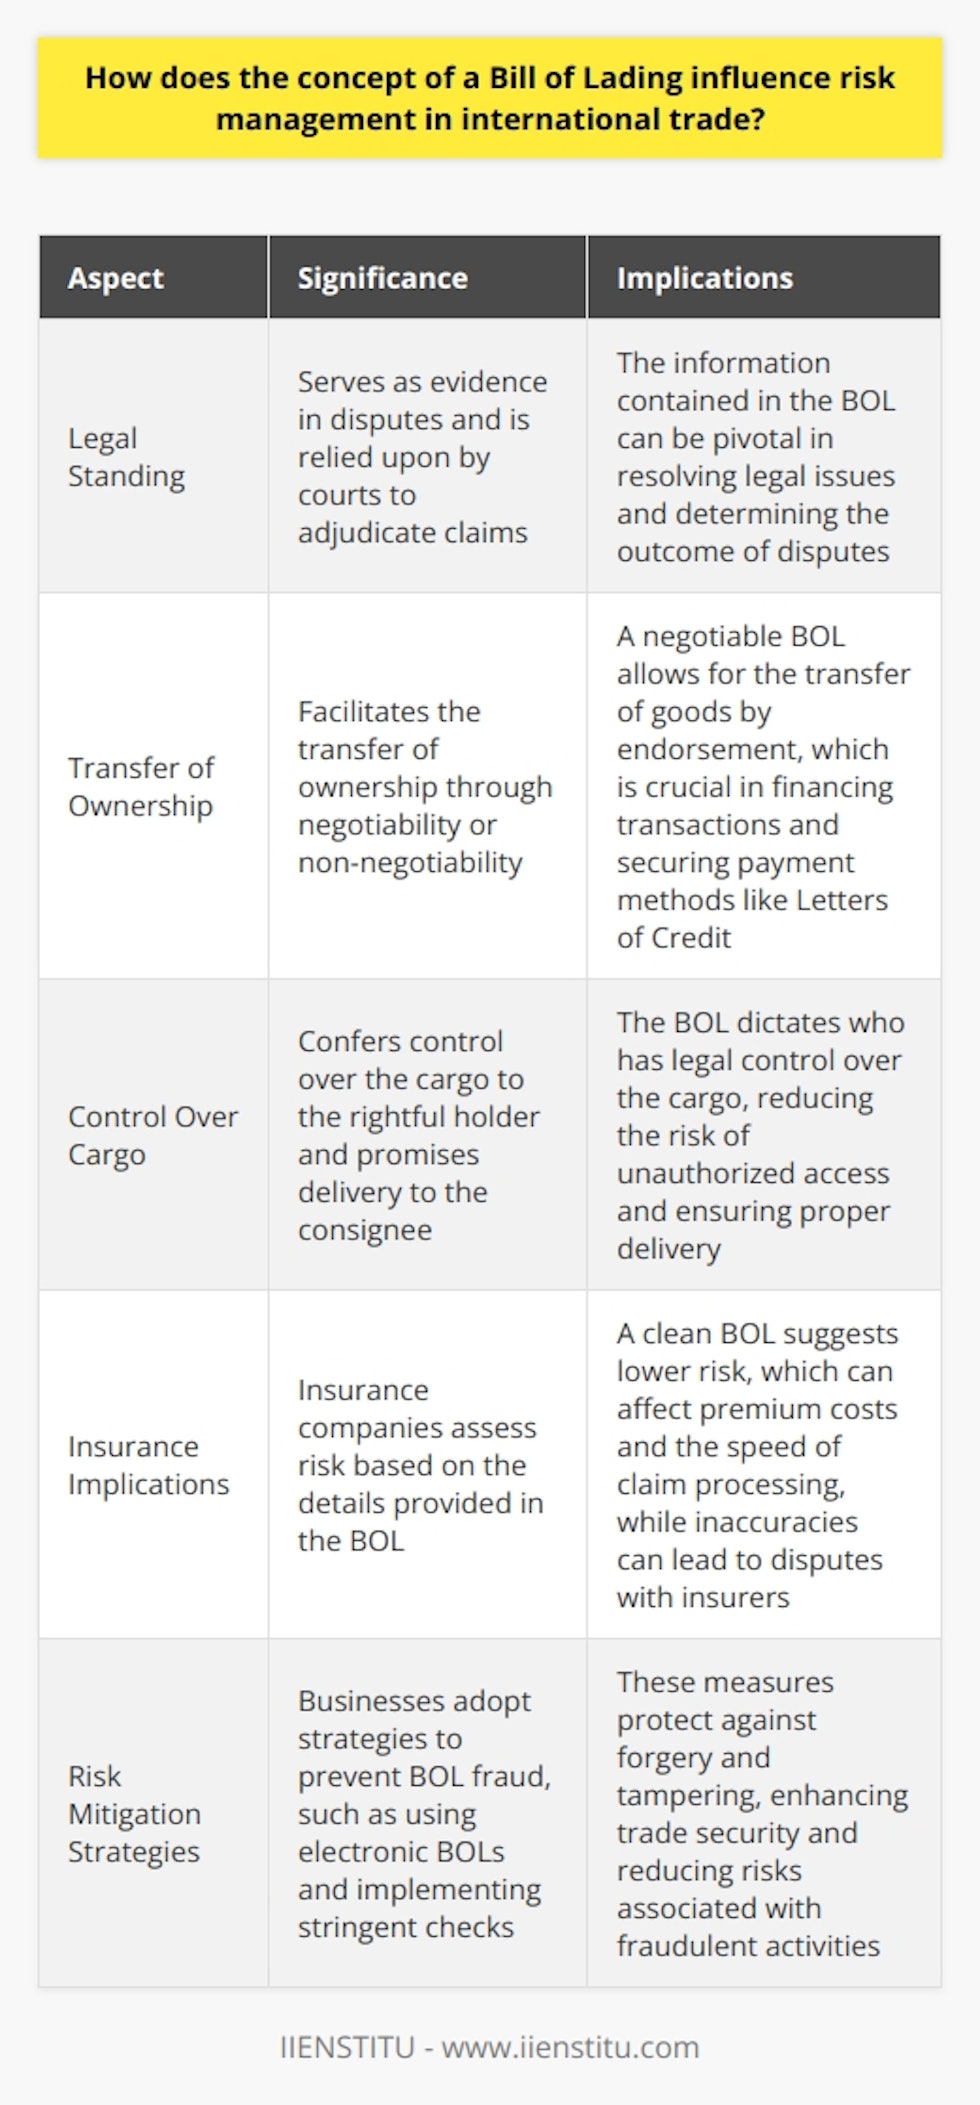 Bill of Lading and Risk Management in International Trade Understanding the Bill of Lading A Bill of Lading (BOL) holds critical importance. It acts as a receipt for shipped goods. It is also a contract between a shipper and carrier. Moreover, it serves as a document of title. Through this multipurpose role, it influences risk management. BOL as a Risk Management Tool When engaging in international trade, participants face numerous risks. These include loss, theft, damage, and delays. The BOL mitigates these risks. It does so through clear terms and conditions. It also delineates responsibilities of the involved parties. Legal Implications The legal standing of a BOL is significant. It provides evidence in disputes. Courts often rely on it to adjudicate claims. The information it contains can prove pivotal. It outlines the specifics of the cargo and the conditions agreed upon. Transfer of Ownership The BOL facilitates the transfer of ownership. It is negotiable or non-negotiable. A negotiable BOL allows transfer of goods by endorsement. This feature is vital in financing transactions. It helps in securing payment methods like Letters of Credit. Control Over Cargo Control over the cargo is crucial. The BOL confers this to the rightful holder. It promises delivery to the consignee. Hence, the BOL dictates who has legal control. This reduces the risk of unauthorized access. Insurance Implications Insurance companies scrutinize the BOL. They assess risk based on its details. A clean BOL suggests lower risk. This can affect premium costs. It also impacts the speed of claim processing. Inaccuracies can lead to disputes with insurers. BOL in Risk Mitigation Strategies Experts consider the BOL in risk management. They ensure proper issuance and handling. Companies adopt strategies to prevent BOL fraud. These include using electronic BOLs. They also involve stringent checks. Such measures protect against forgery and tampering. Conclusion The Bill of Lading is not just a document. It forms the backbone of risk management. Every stakeholder in international trade must understand its importance. Businesses should manage it with care. Doing so diminishes risks and enhances trade security.